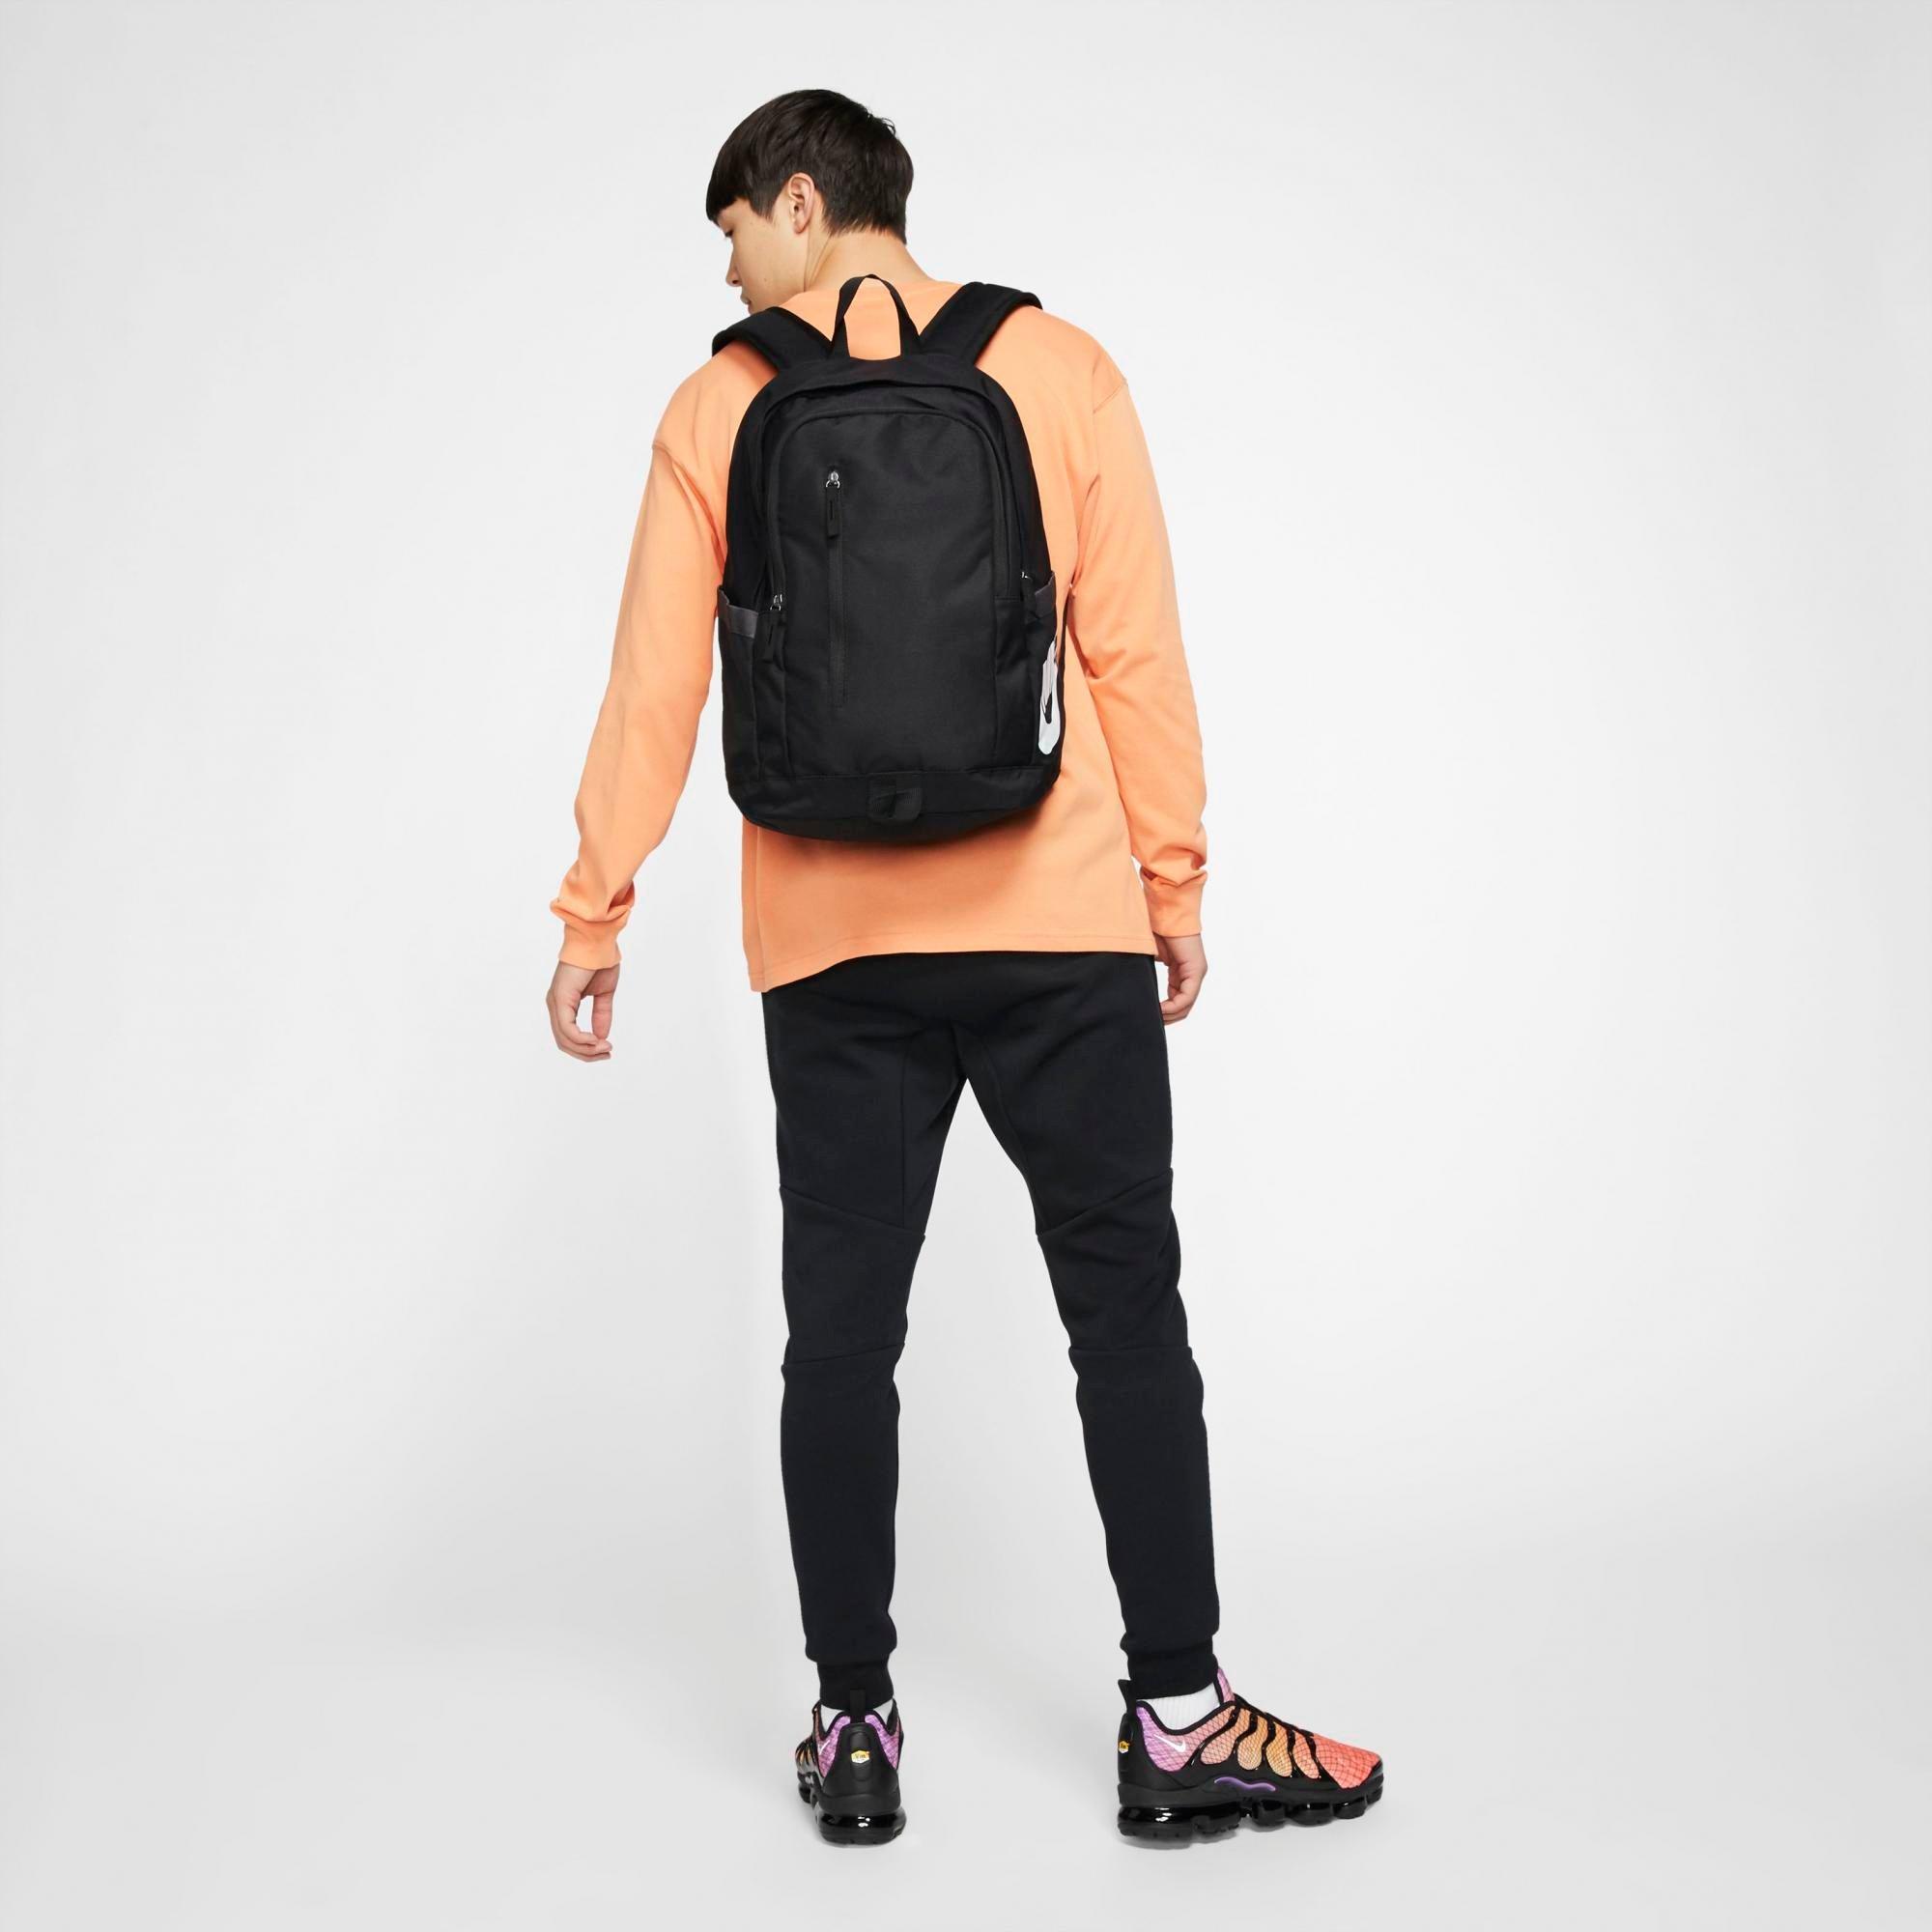 nike all access soleday backpack black